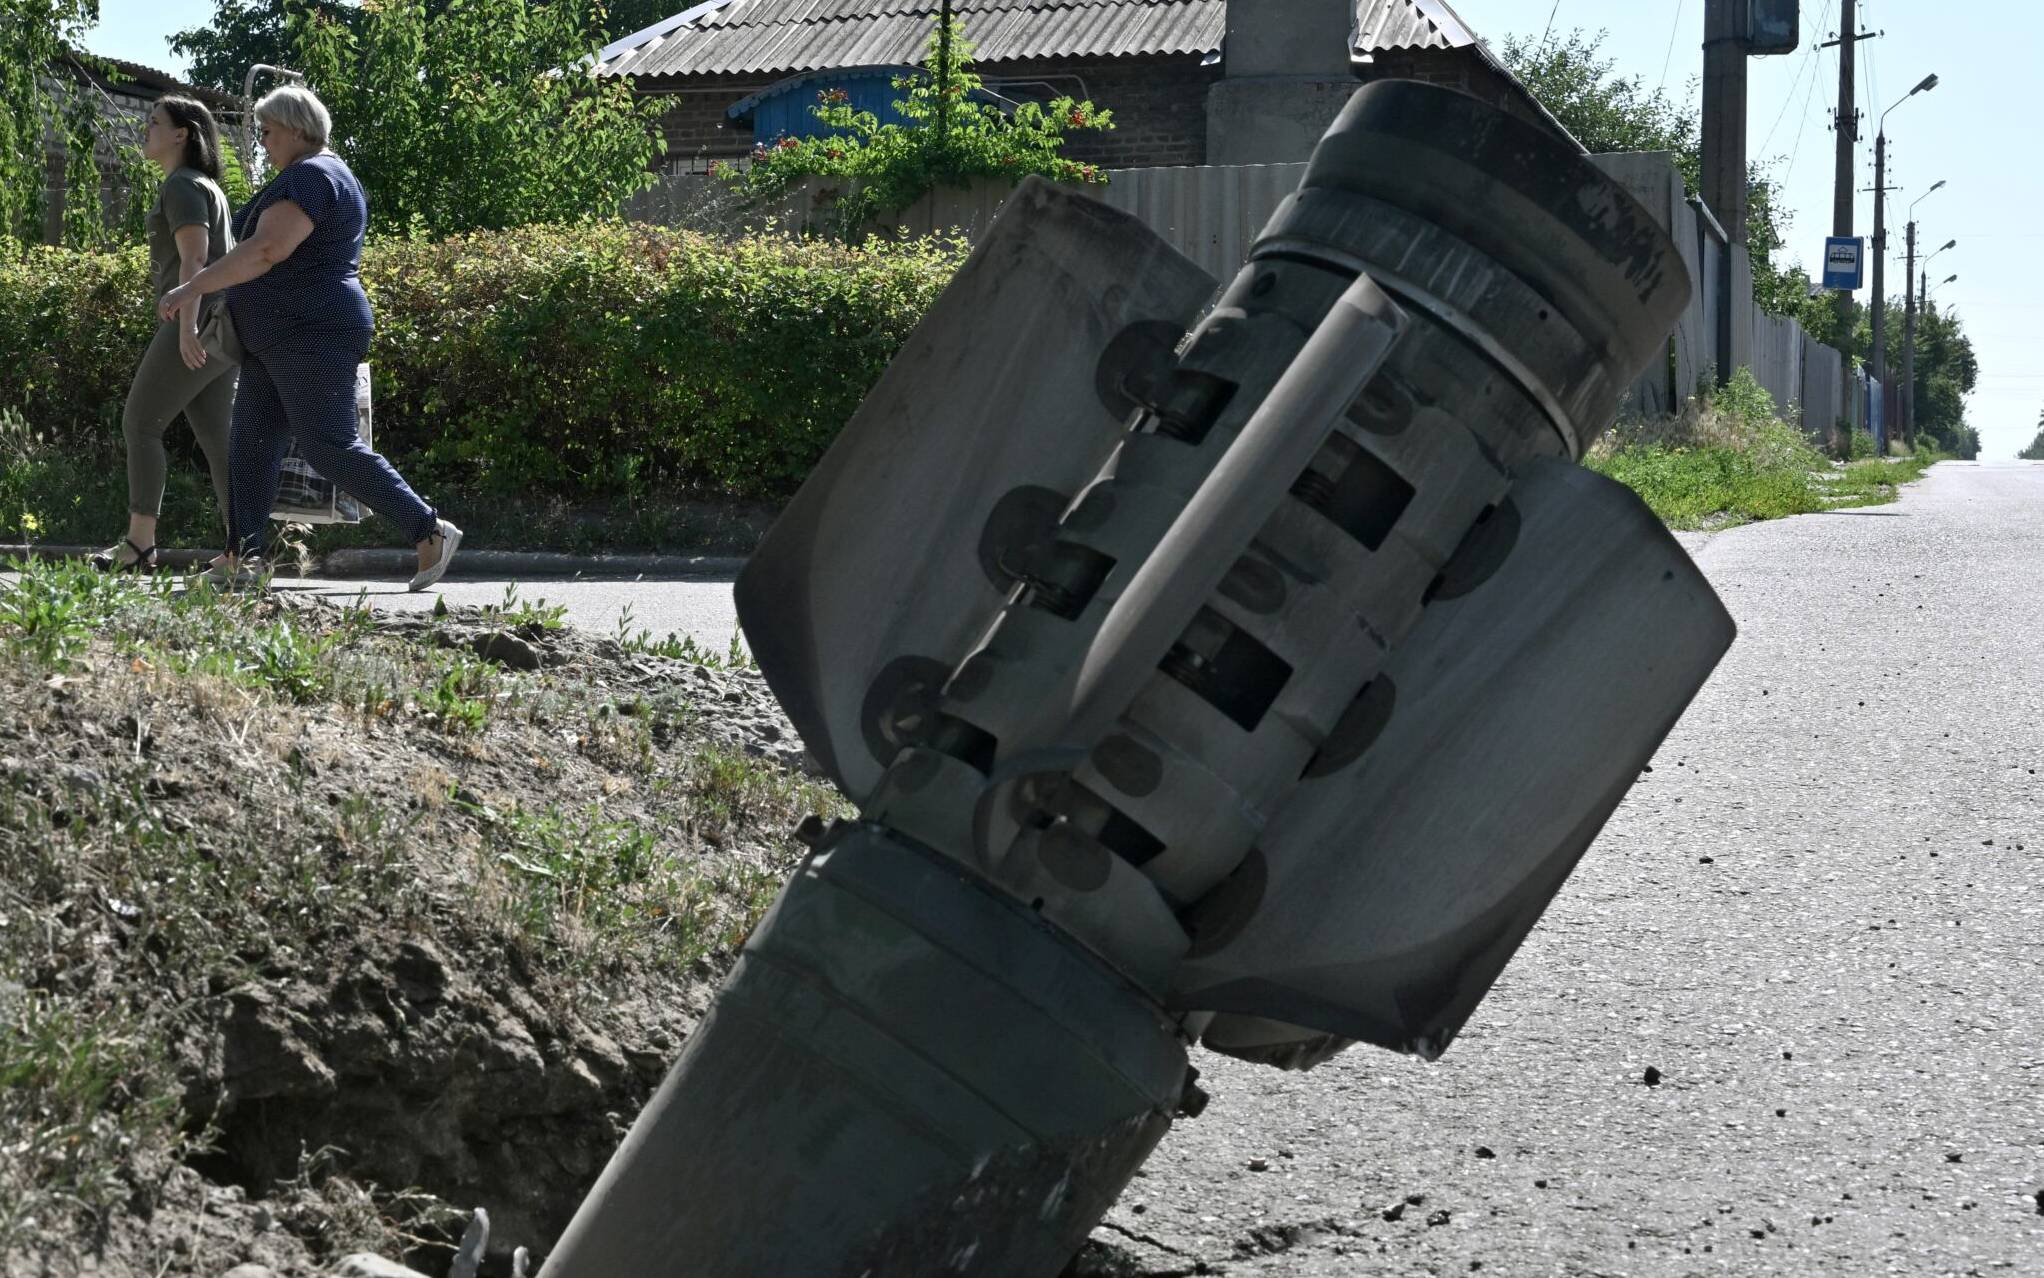 Pedestrians walk past the tail section of a rocket which is embedded in the ground, in Kramatorsk on July 4, 2022, the day after a Russian rocket attack. (Photo by Genya SAVILOV / AFP)